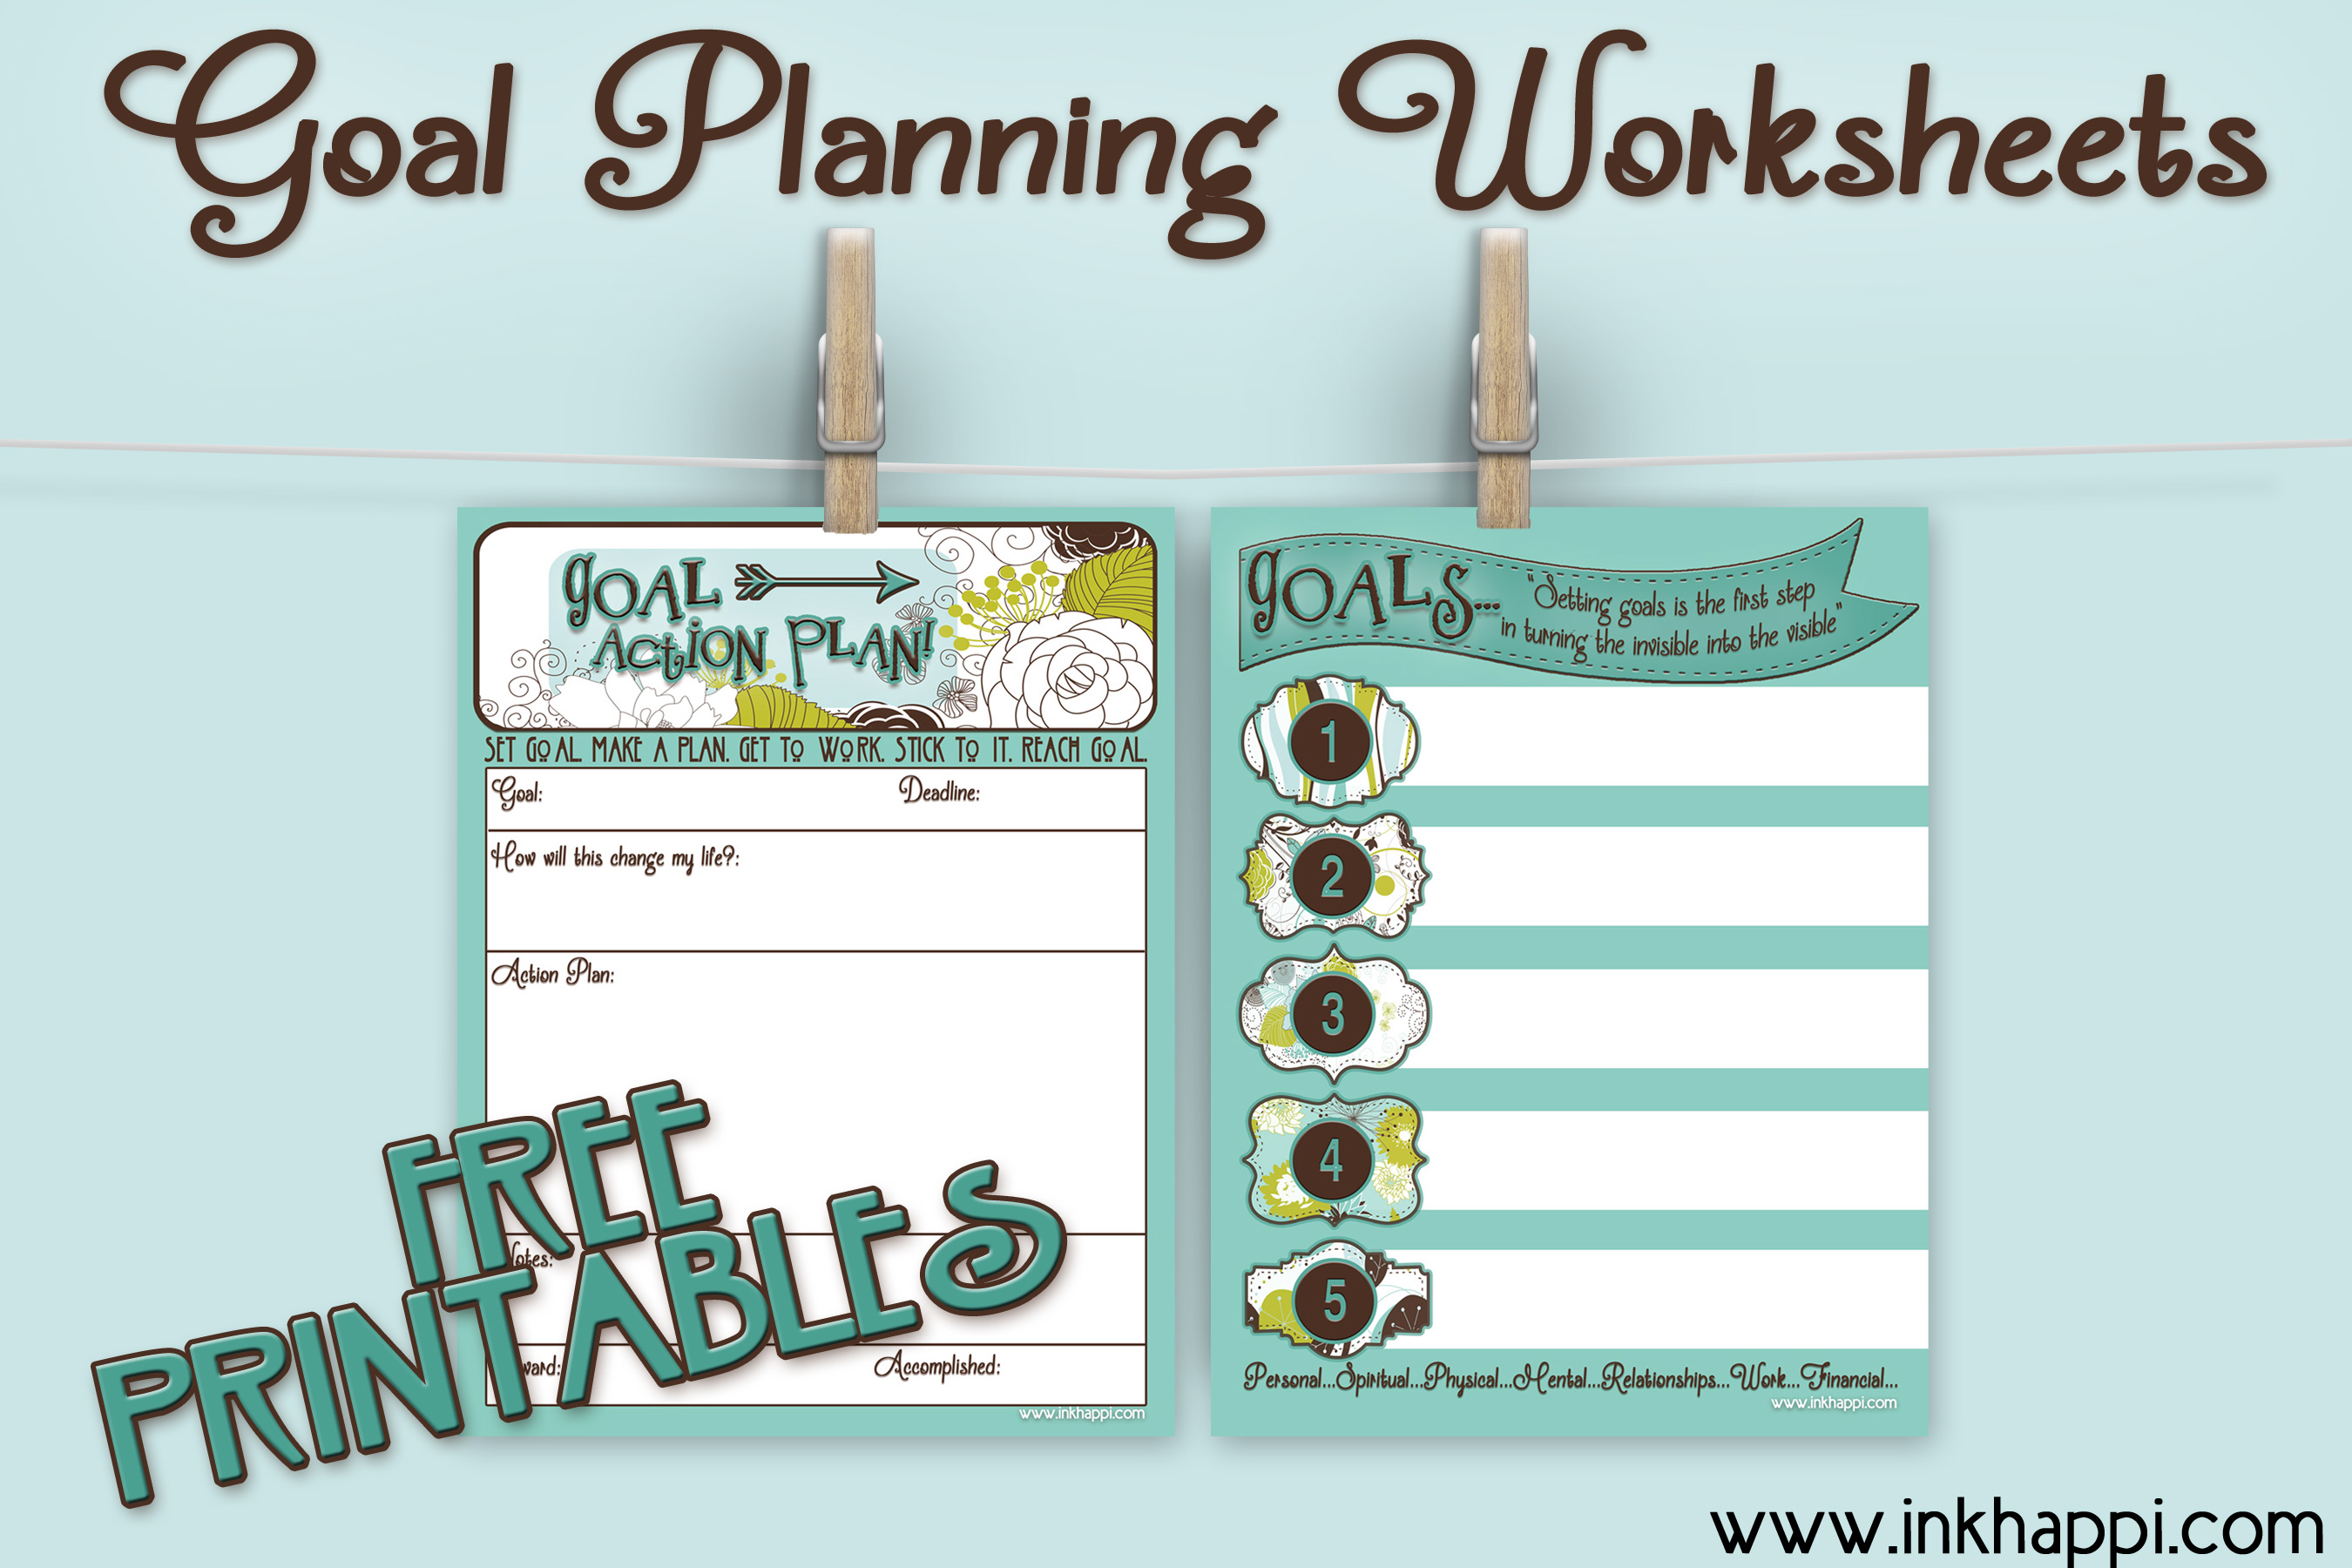 Goal Planning Worksheets with free printables! - inkhappi